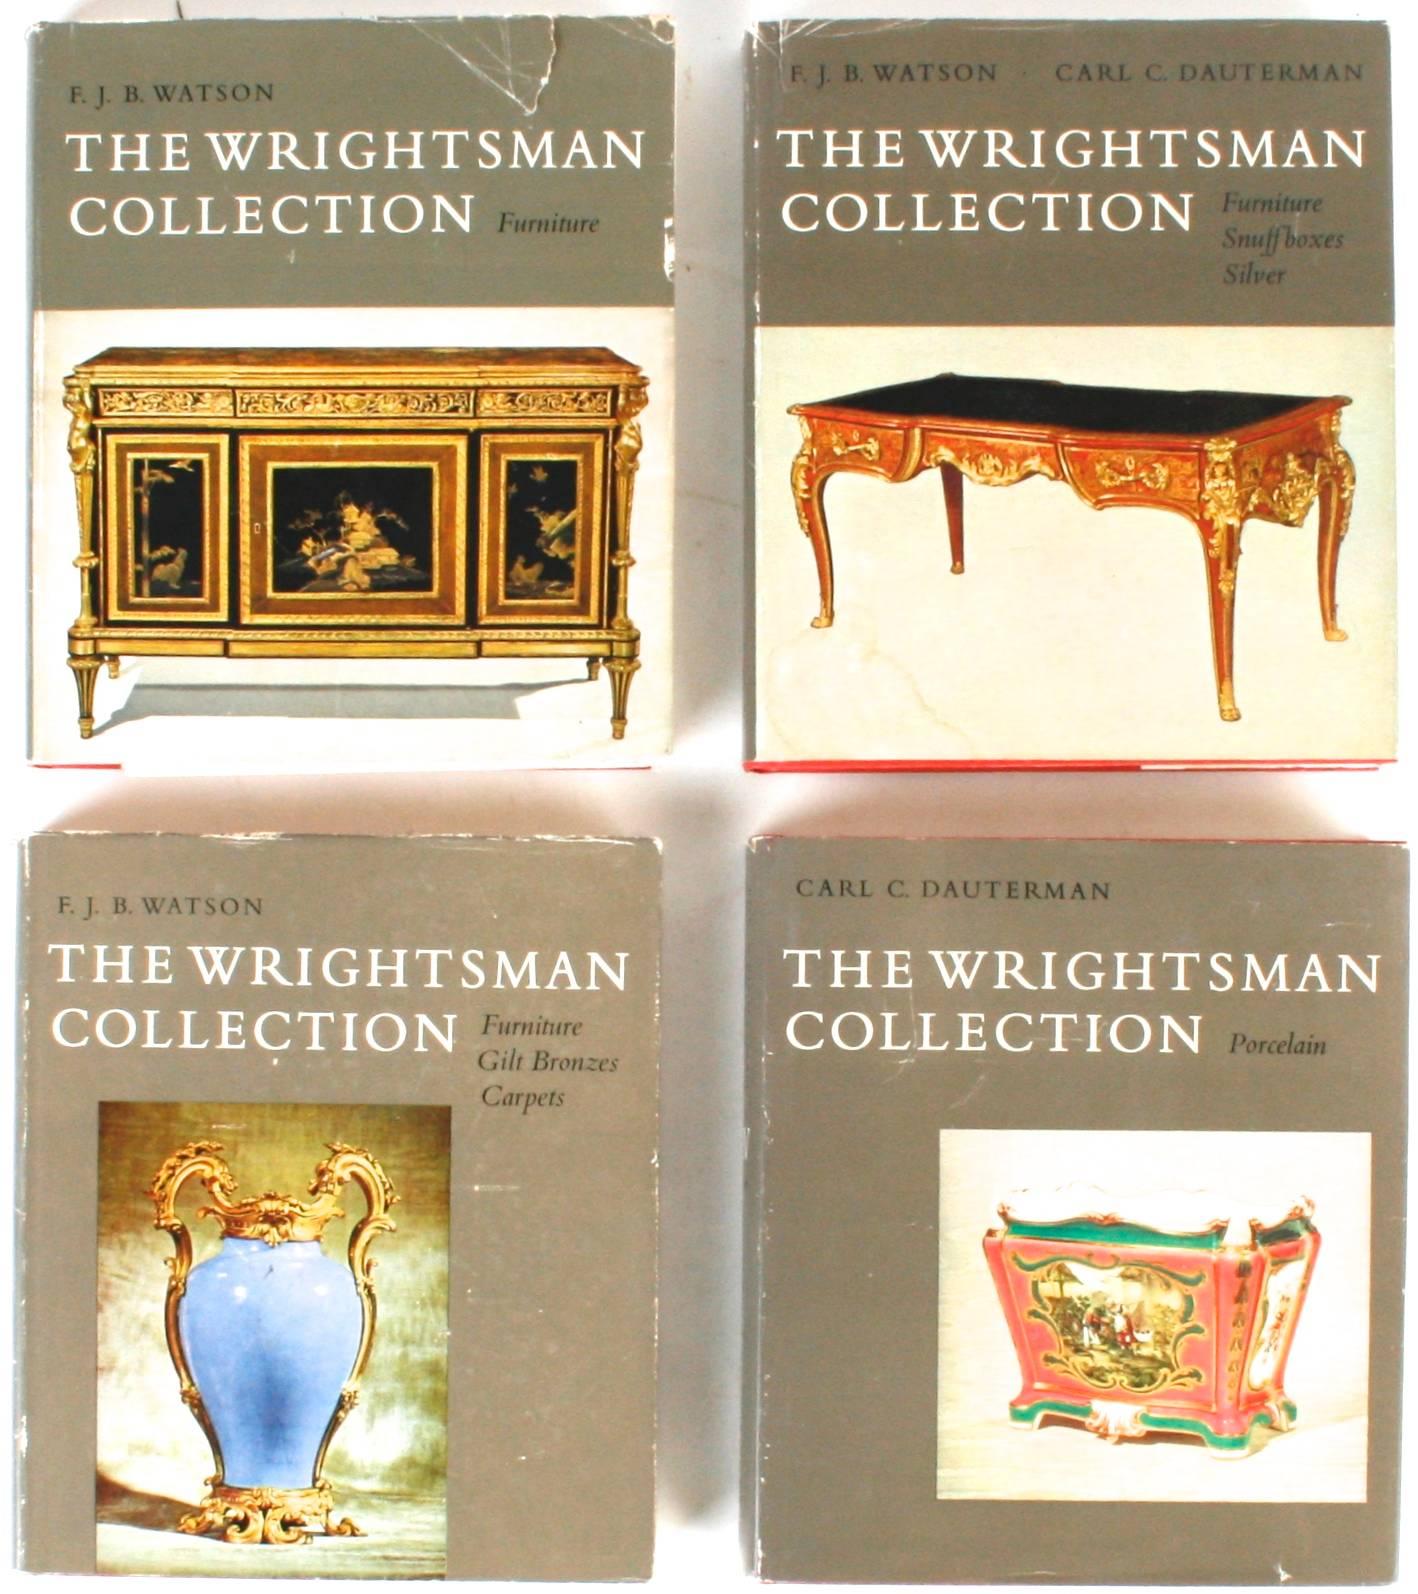 The Wrightsman collection, Vols. I-V. New York: The Metropolitan Museum of Art, 1966-1973. First edition hardcovers with dust jackets. 2248 pp. Inscribed by the Wrightsmans. The complete series of The Wrightsman collection catalogues from The